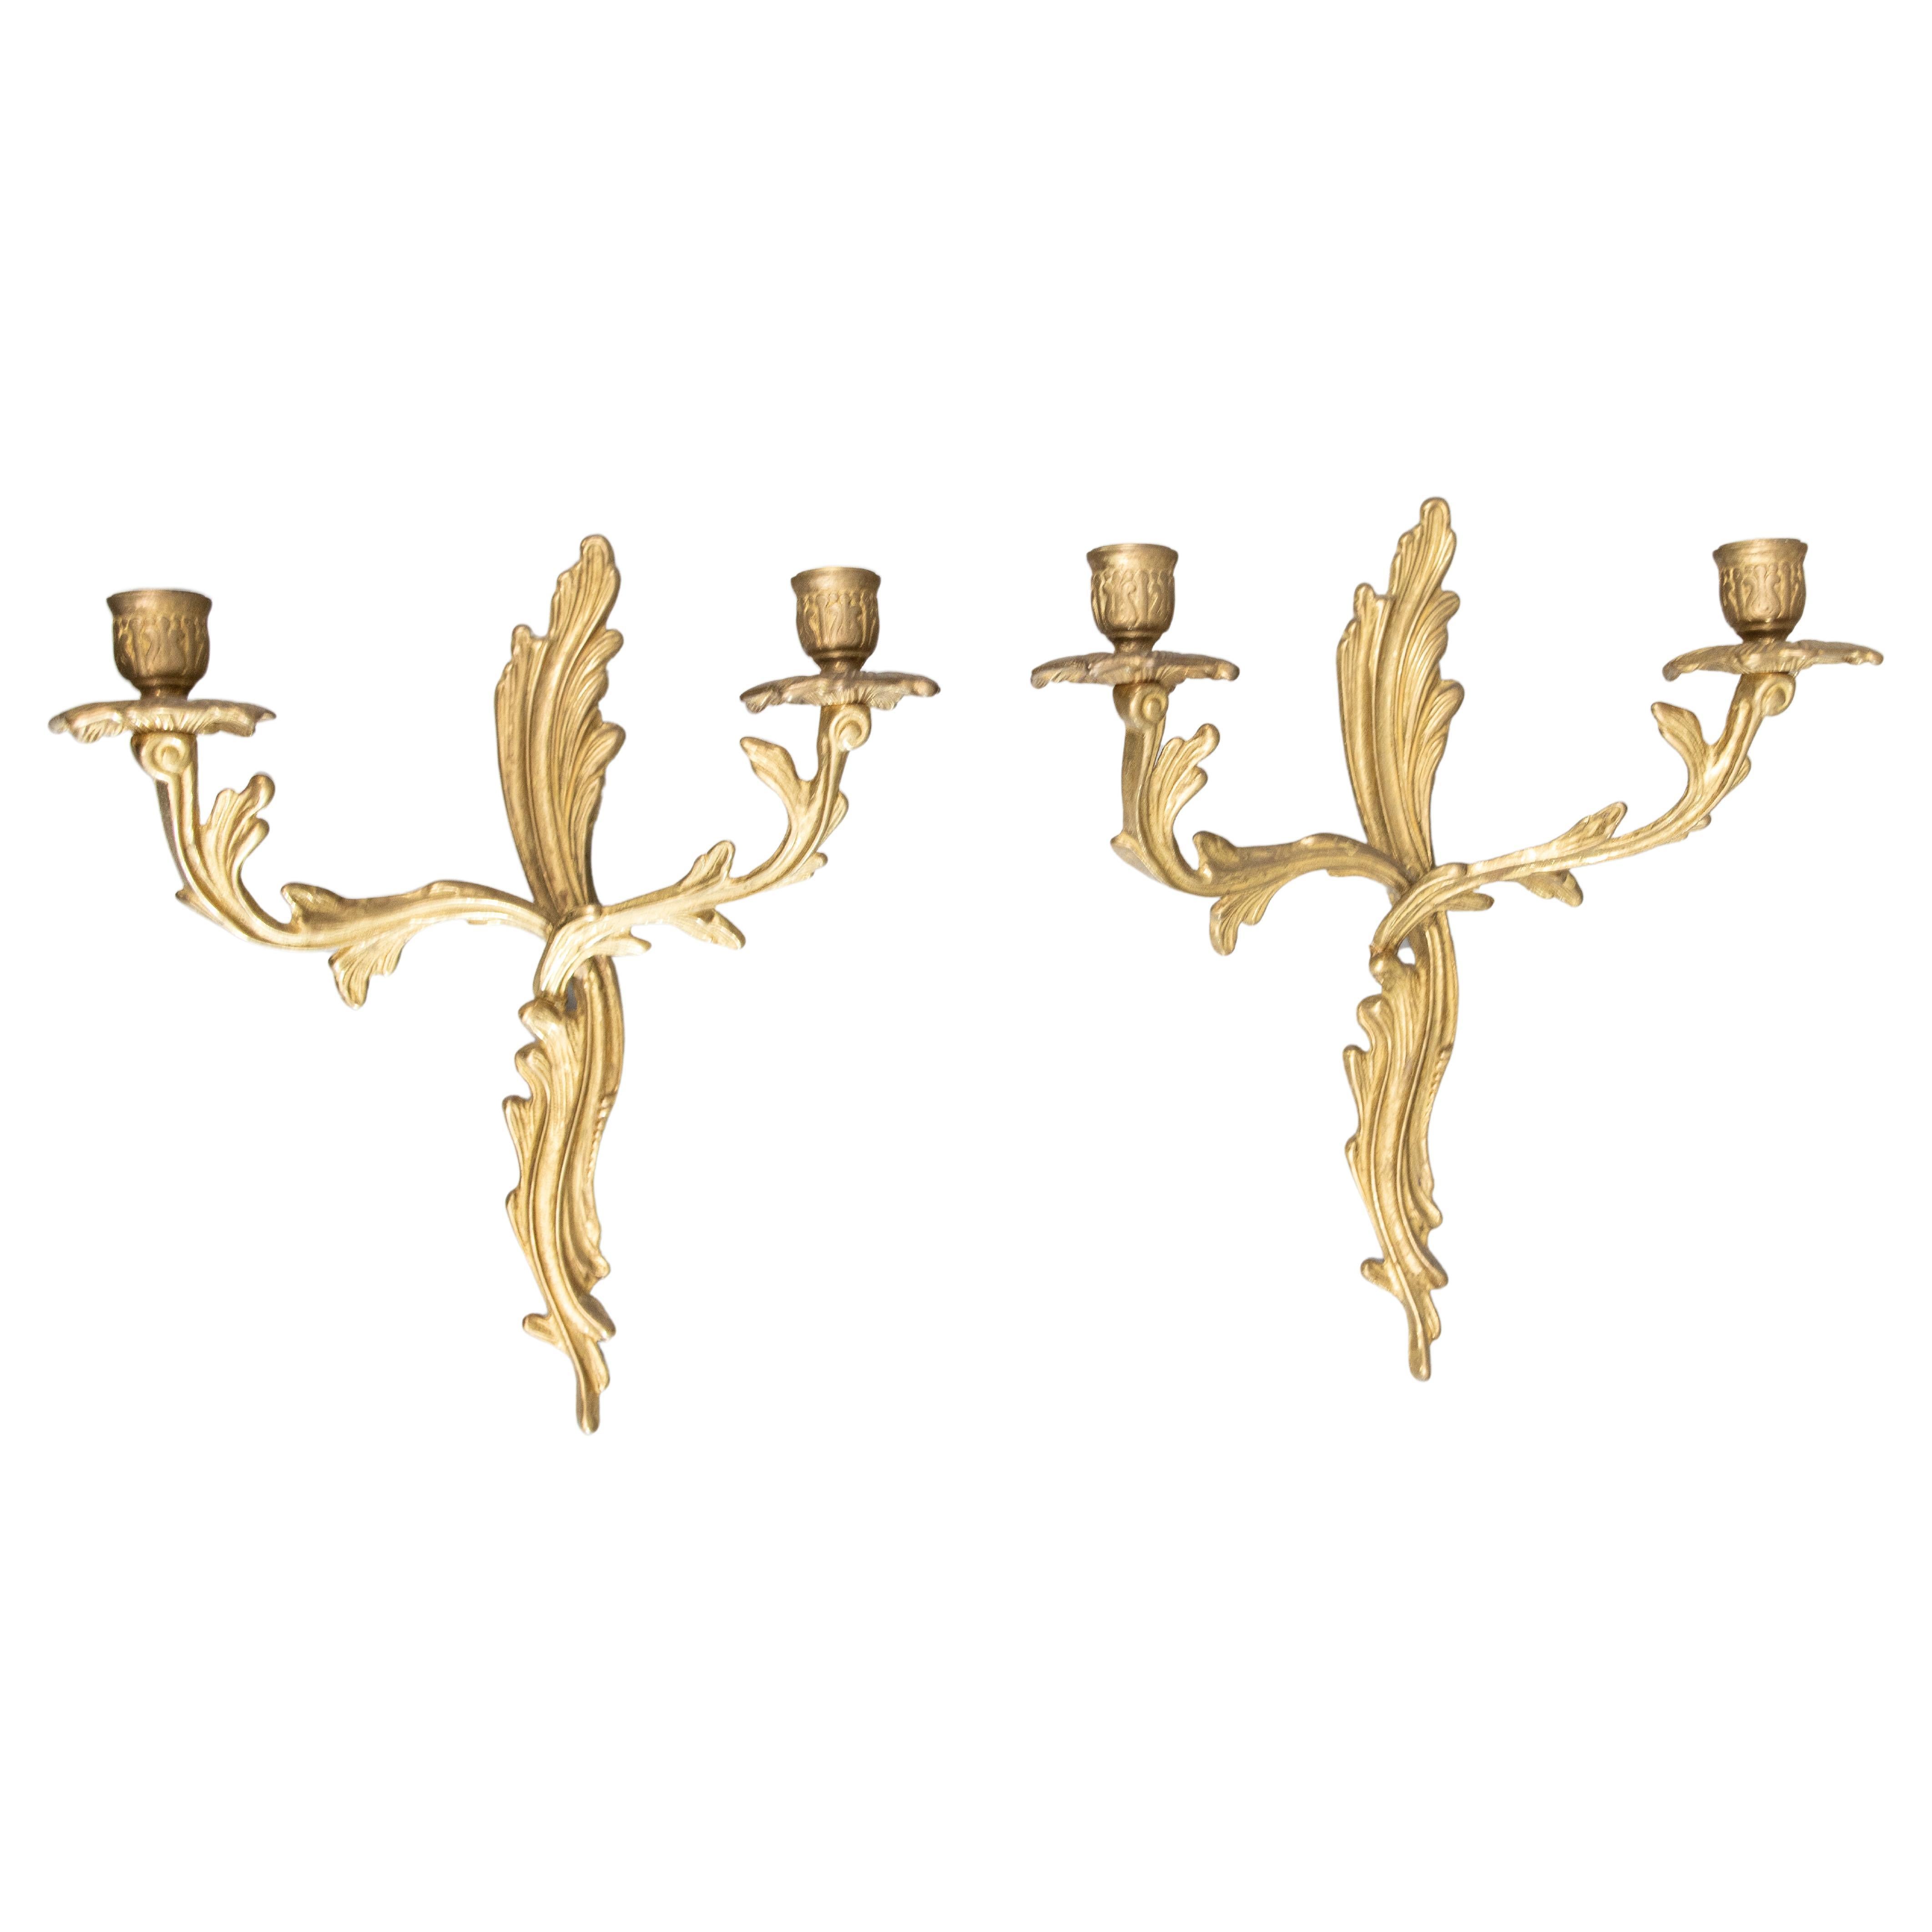 Pair of Antique French Rococo Style Gilt Brass Candelabras Wall Candle Sconces For Sale